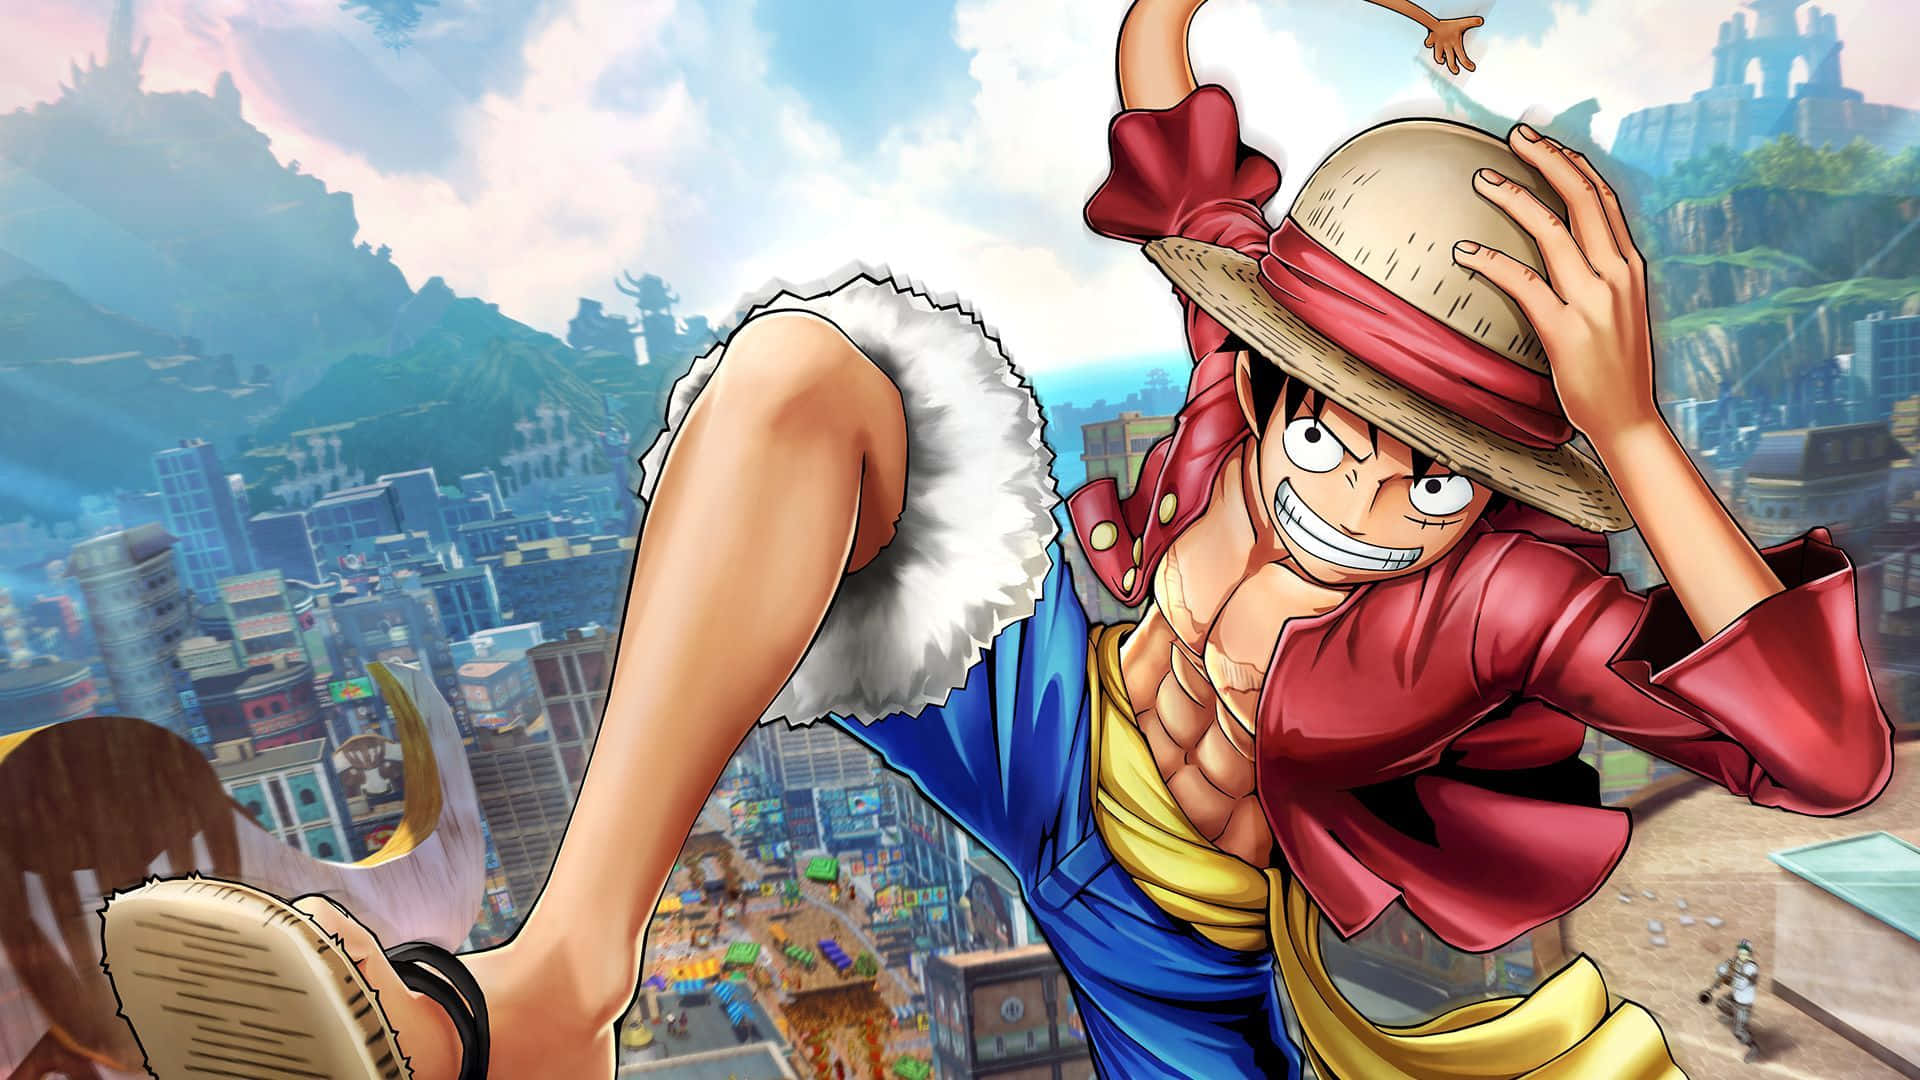 Ps4 Anime One Piece Wallpaper